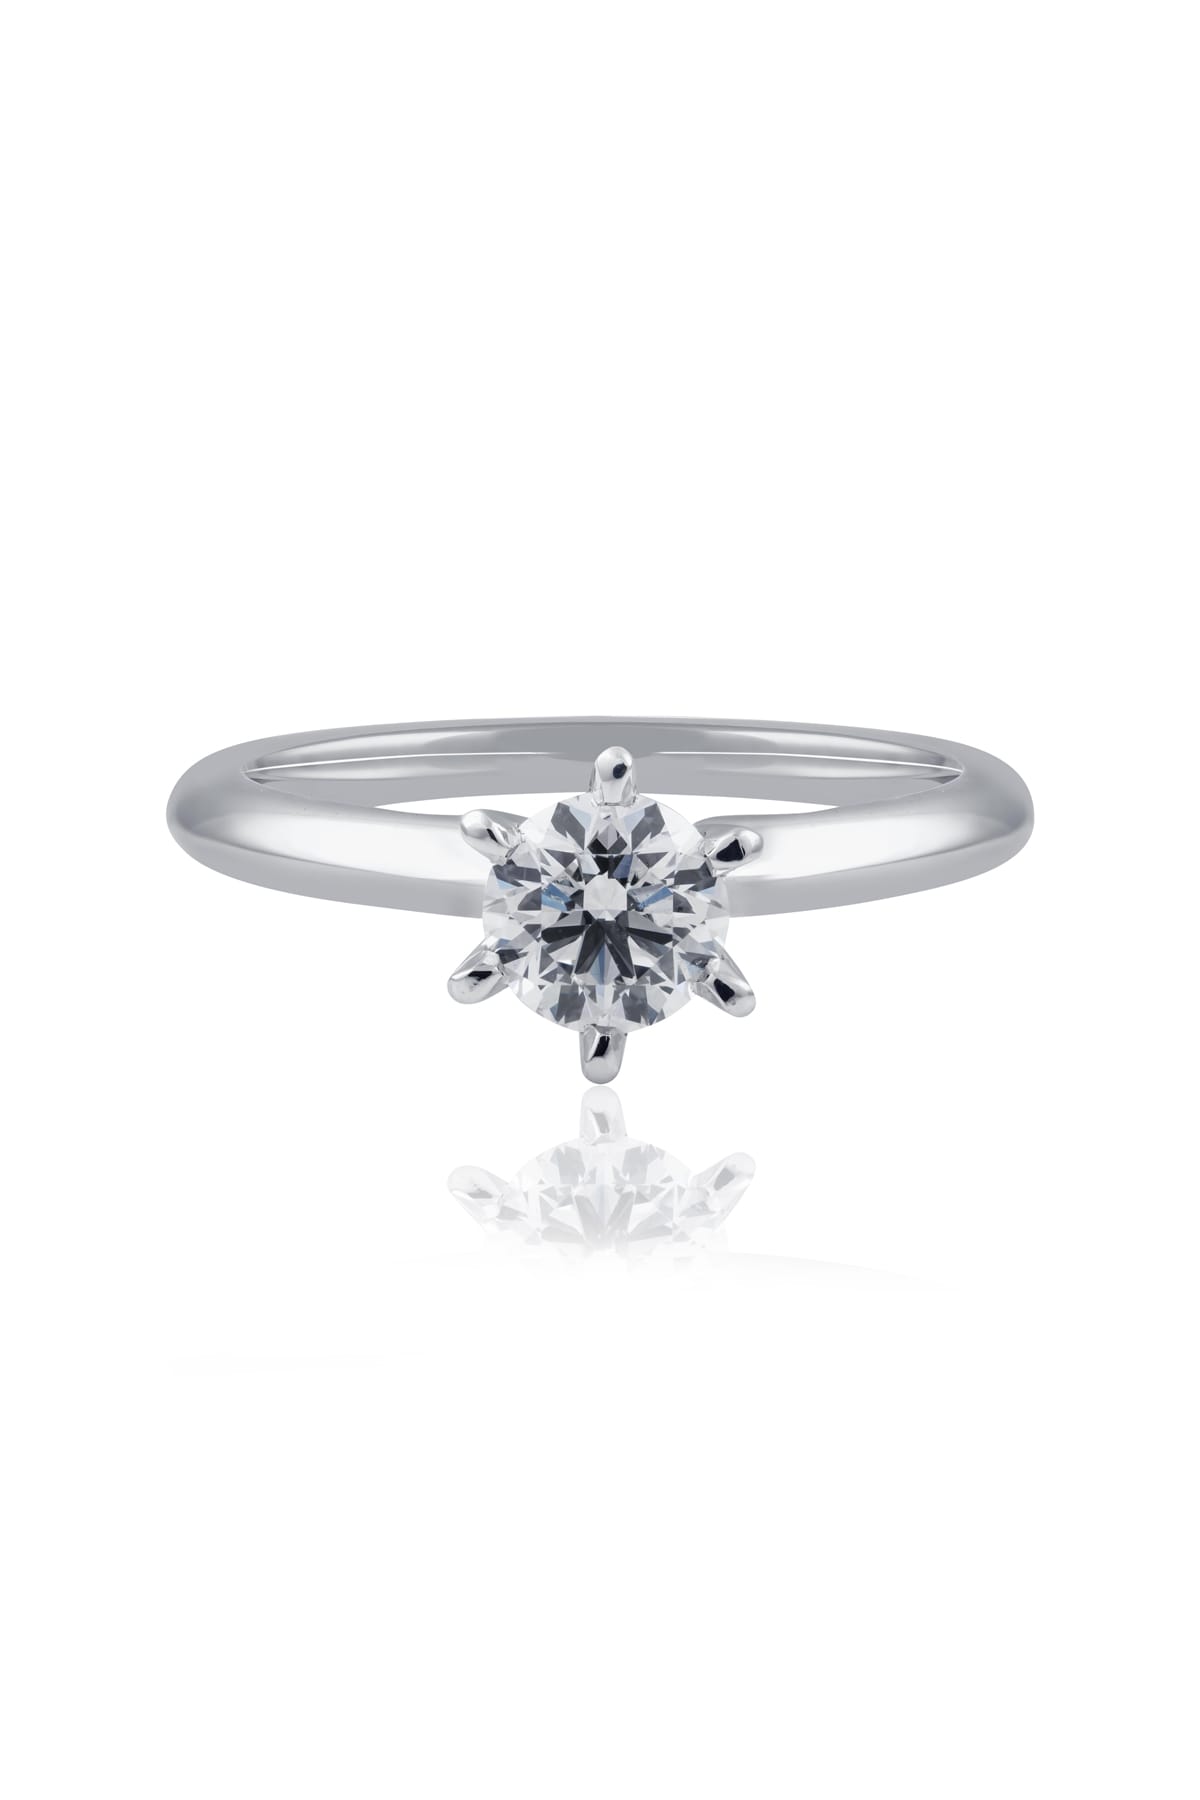 0.70ct Diamond Solitaire Engagement Ring With 6 Claw Setting In White Gold from LeGassick Jewellery Gold Coast.